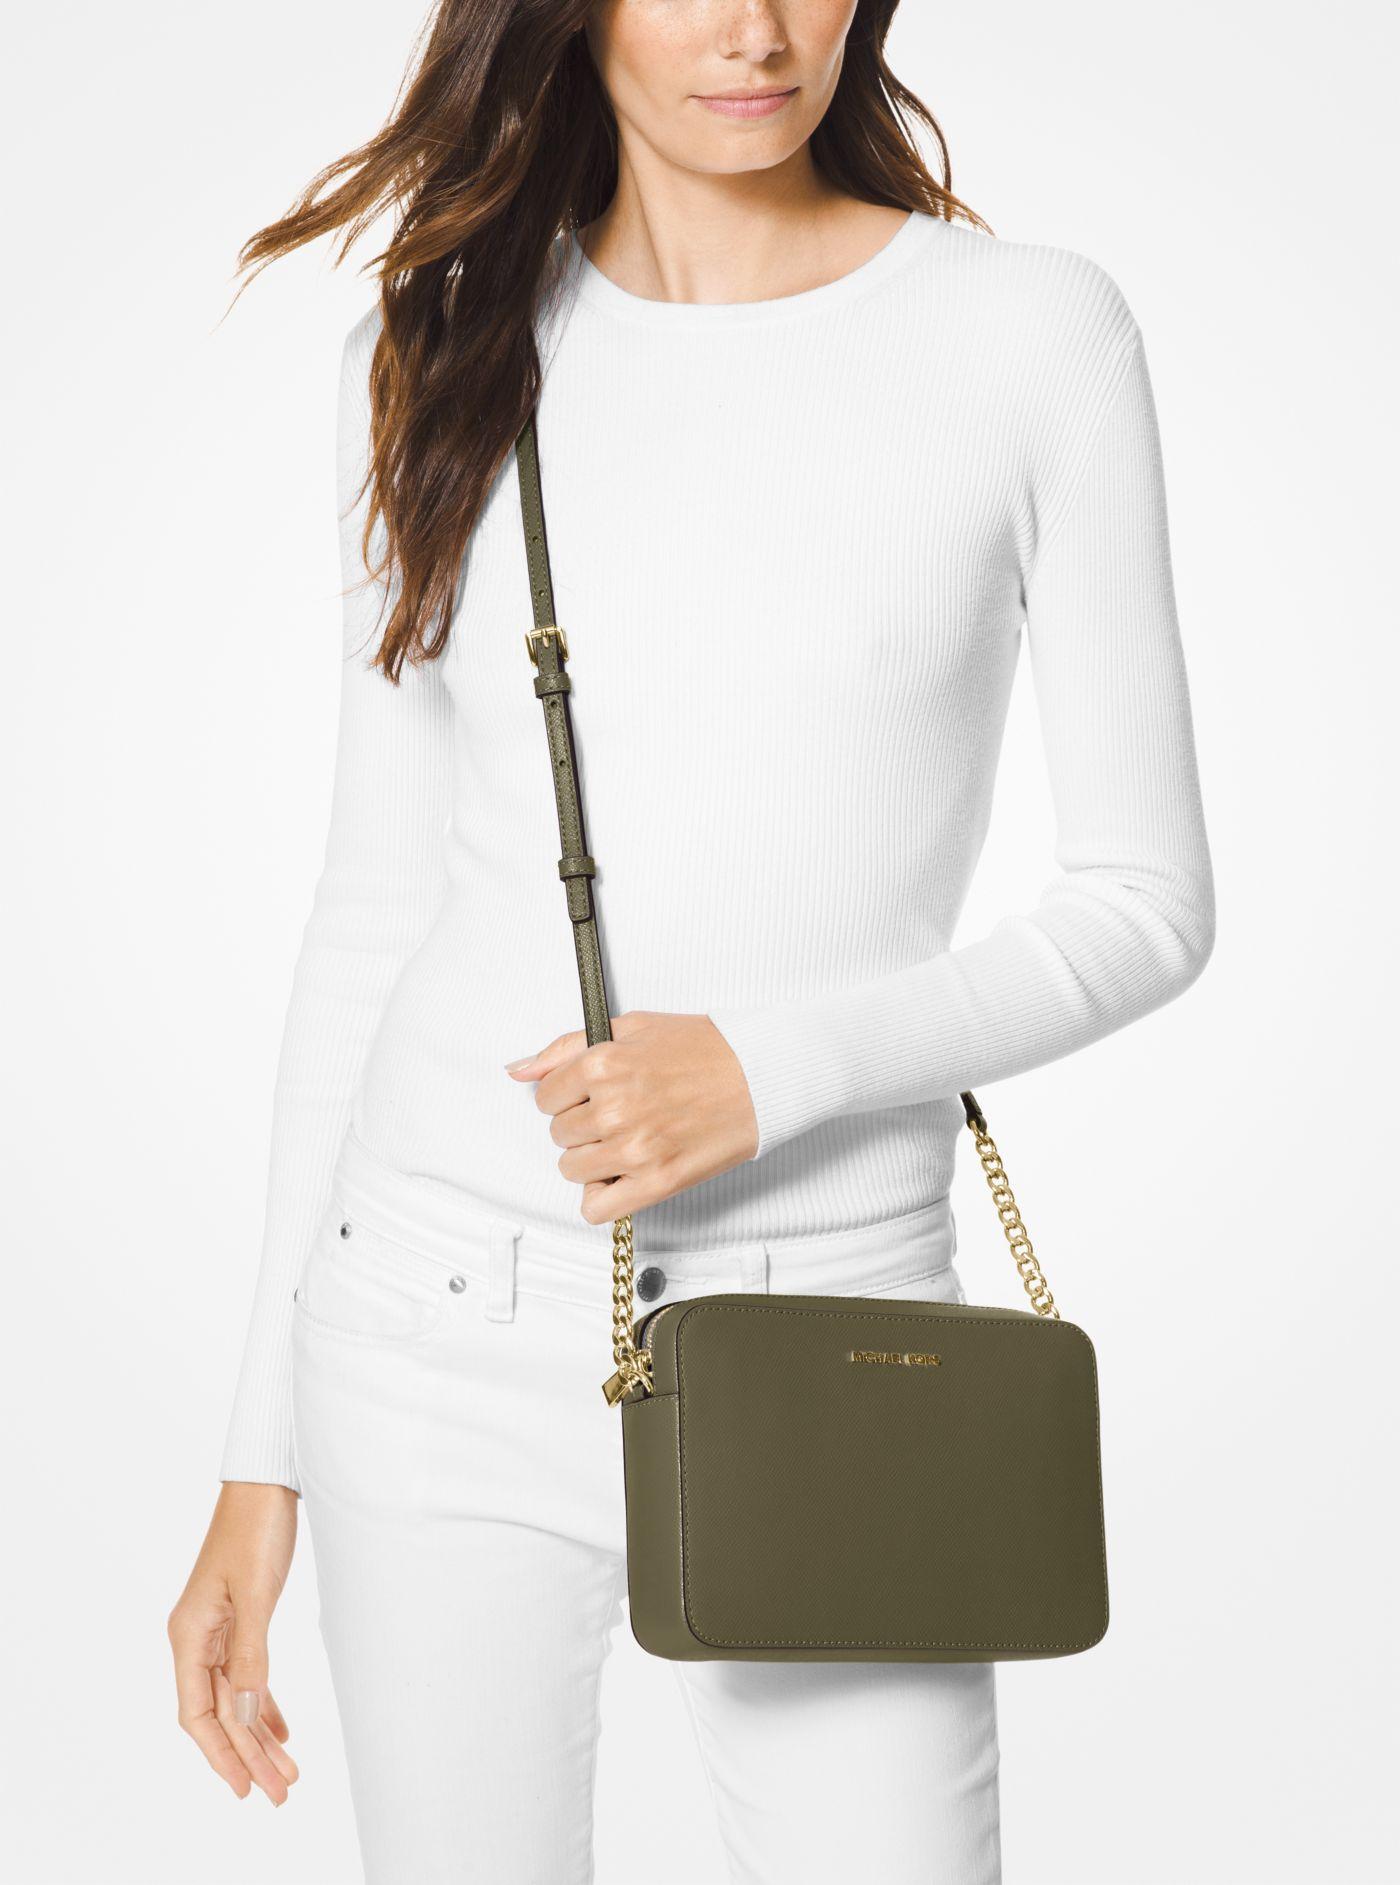 Michael Kors Jet Set Large Saffiano Leather Crossbody Bag in Olive (Green)  - Lyst